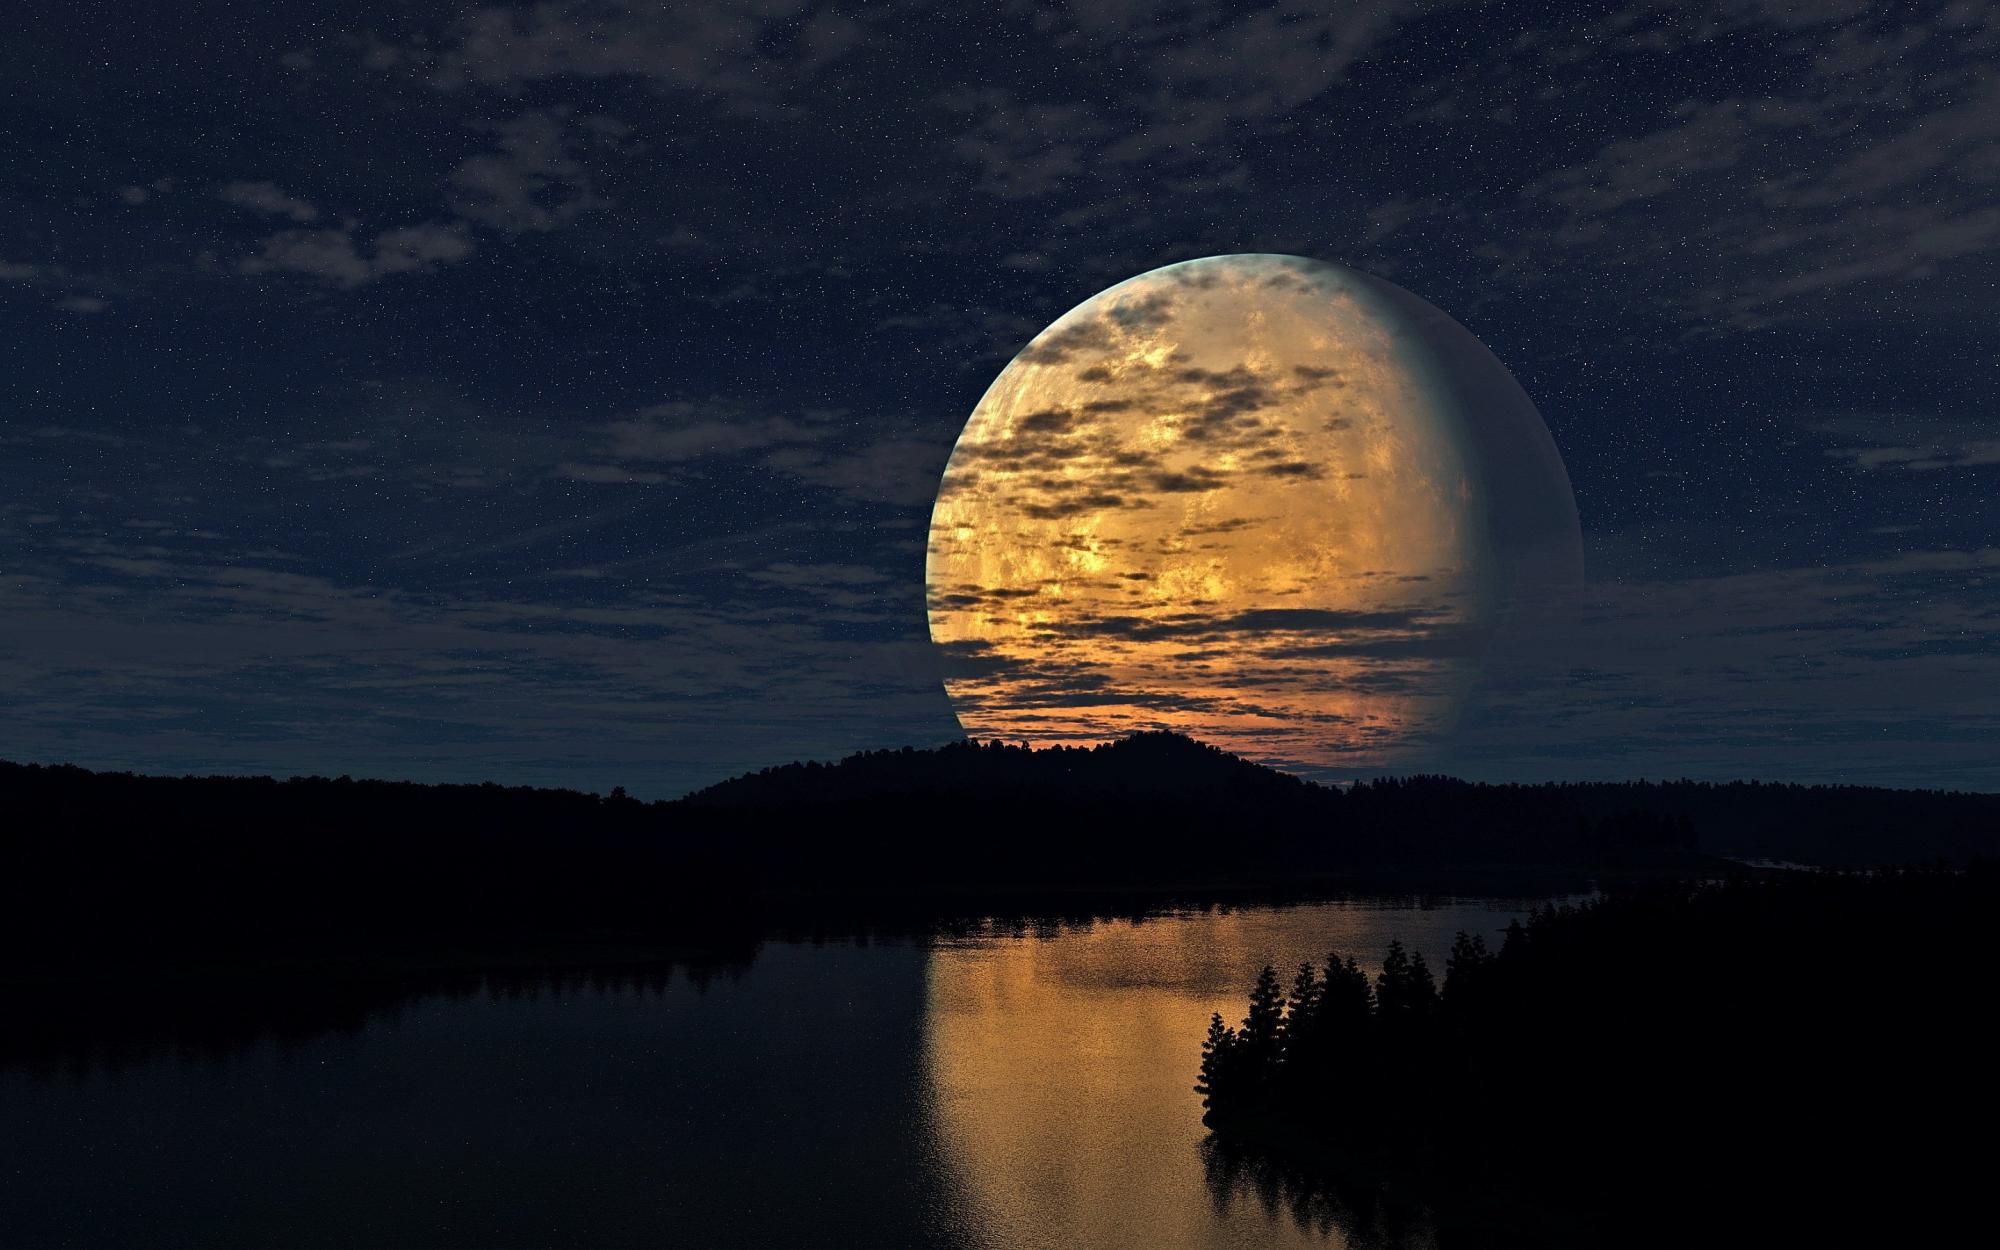 Nom : scenery-river-moon-night-wallpaper-wallpapers.jpg
Affichages : 113
Taille : 238,8 Ko